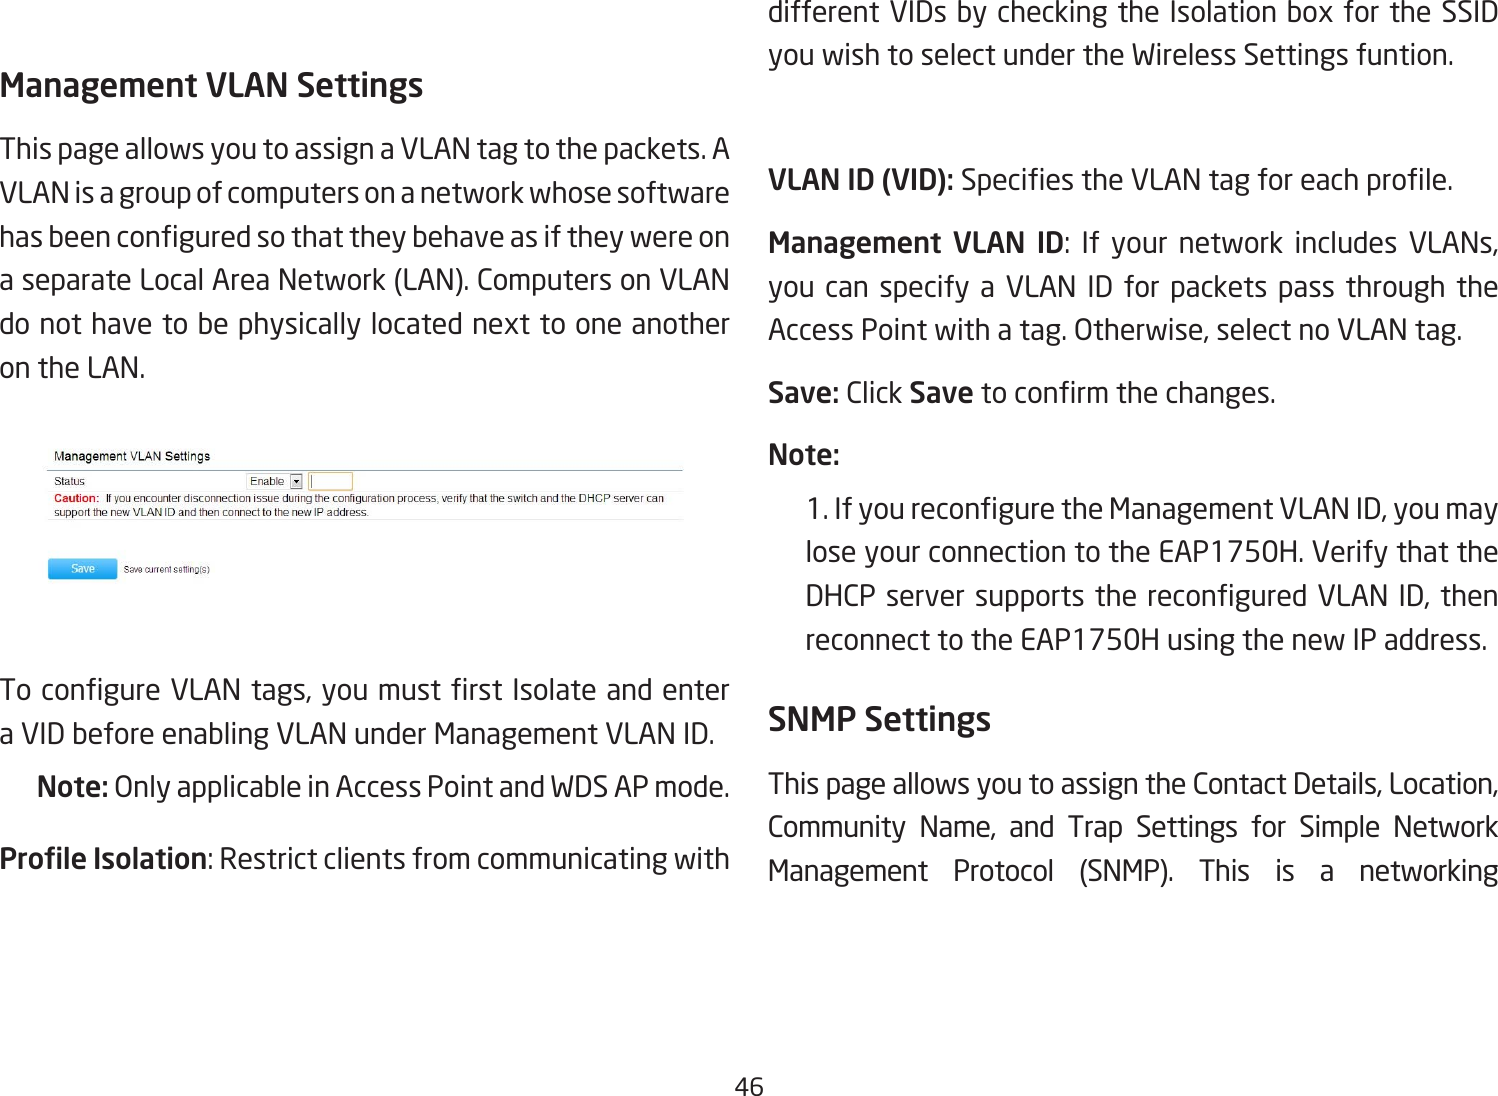 46Management VLAN SettingsThis page allows you to assign a VLAN tag to the packets. A VLAN is a group of computers on a network whose software hasbeenconguredsothattheybehaveasiftheywereona separate Local Area Network (LAN). Computers on VLAN do not have to be physically located next to one another on the LAN.TocongureVLANtags,youmustrstIsolateandentera VID before enabling VLAN under Management VLAN ID.Note: Only applicable in Access Point and WDS AP mode.Prole Isolation:Restrictclientsfromcommunicatingwithdifferent VIDs by checking the Isolation box for the SSID you wish to select under the Wireless Settings funtion.VLAN ID (VID): SpeciestheVLANtagforeachprole.Management  VLAN  ID: If your network includes VLANs,you can specify a VLAN ID for packets pass through the Access Point with a tag. Otherwise, select no VLAN tag.Save: Click Savetoconrmthechanges.Note: 1.IfyoureconguretheManagementVLANID,youmaylose your connection to the EAP1750H. Verify that the DHCPserversupports thereconguredVLANID,thenreconnect to the EAP1750H using the new IP address. SNMP SettingsThis page allows you to assign the Contact Details, Location, Community Name, and Trap Settings for Simple Network Management Protocol (SNMP). This is a networking 